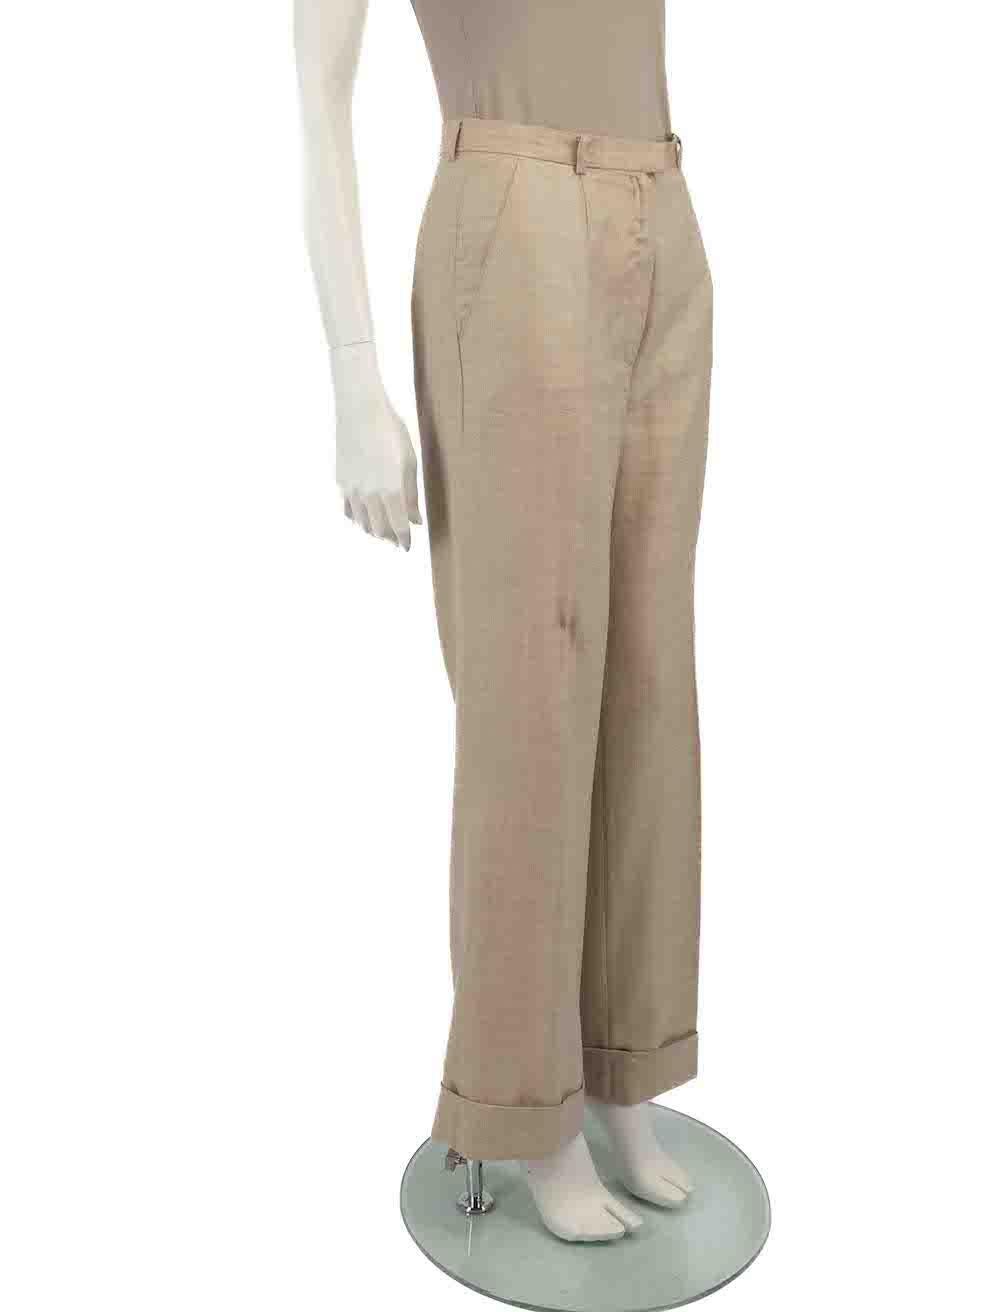 CONDITION is Very good. Minimal wear to trousers is evident. Minimal wear to hem, where there are plucks to the weave and discolouration at the edge on this used Escada designer resale item.
 
 
 
 Details
 
 
 Beige
 
 Cashmere
 
 Trousers
 
